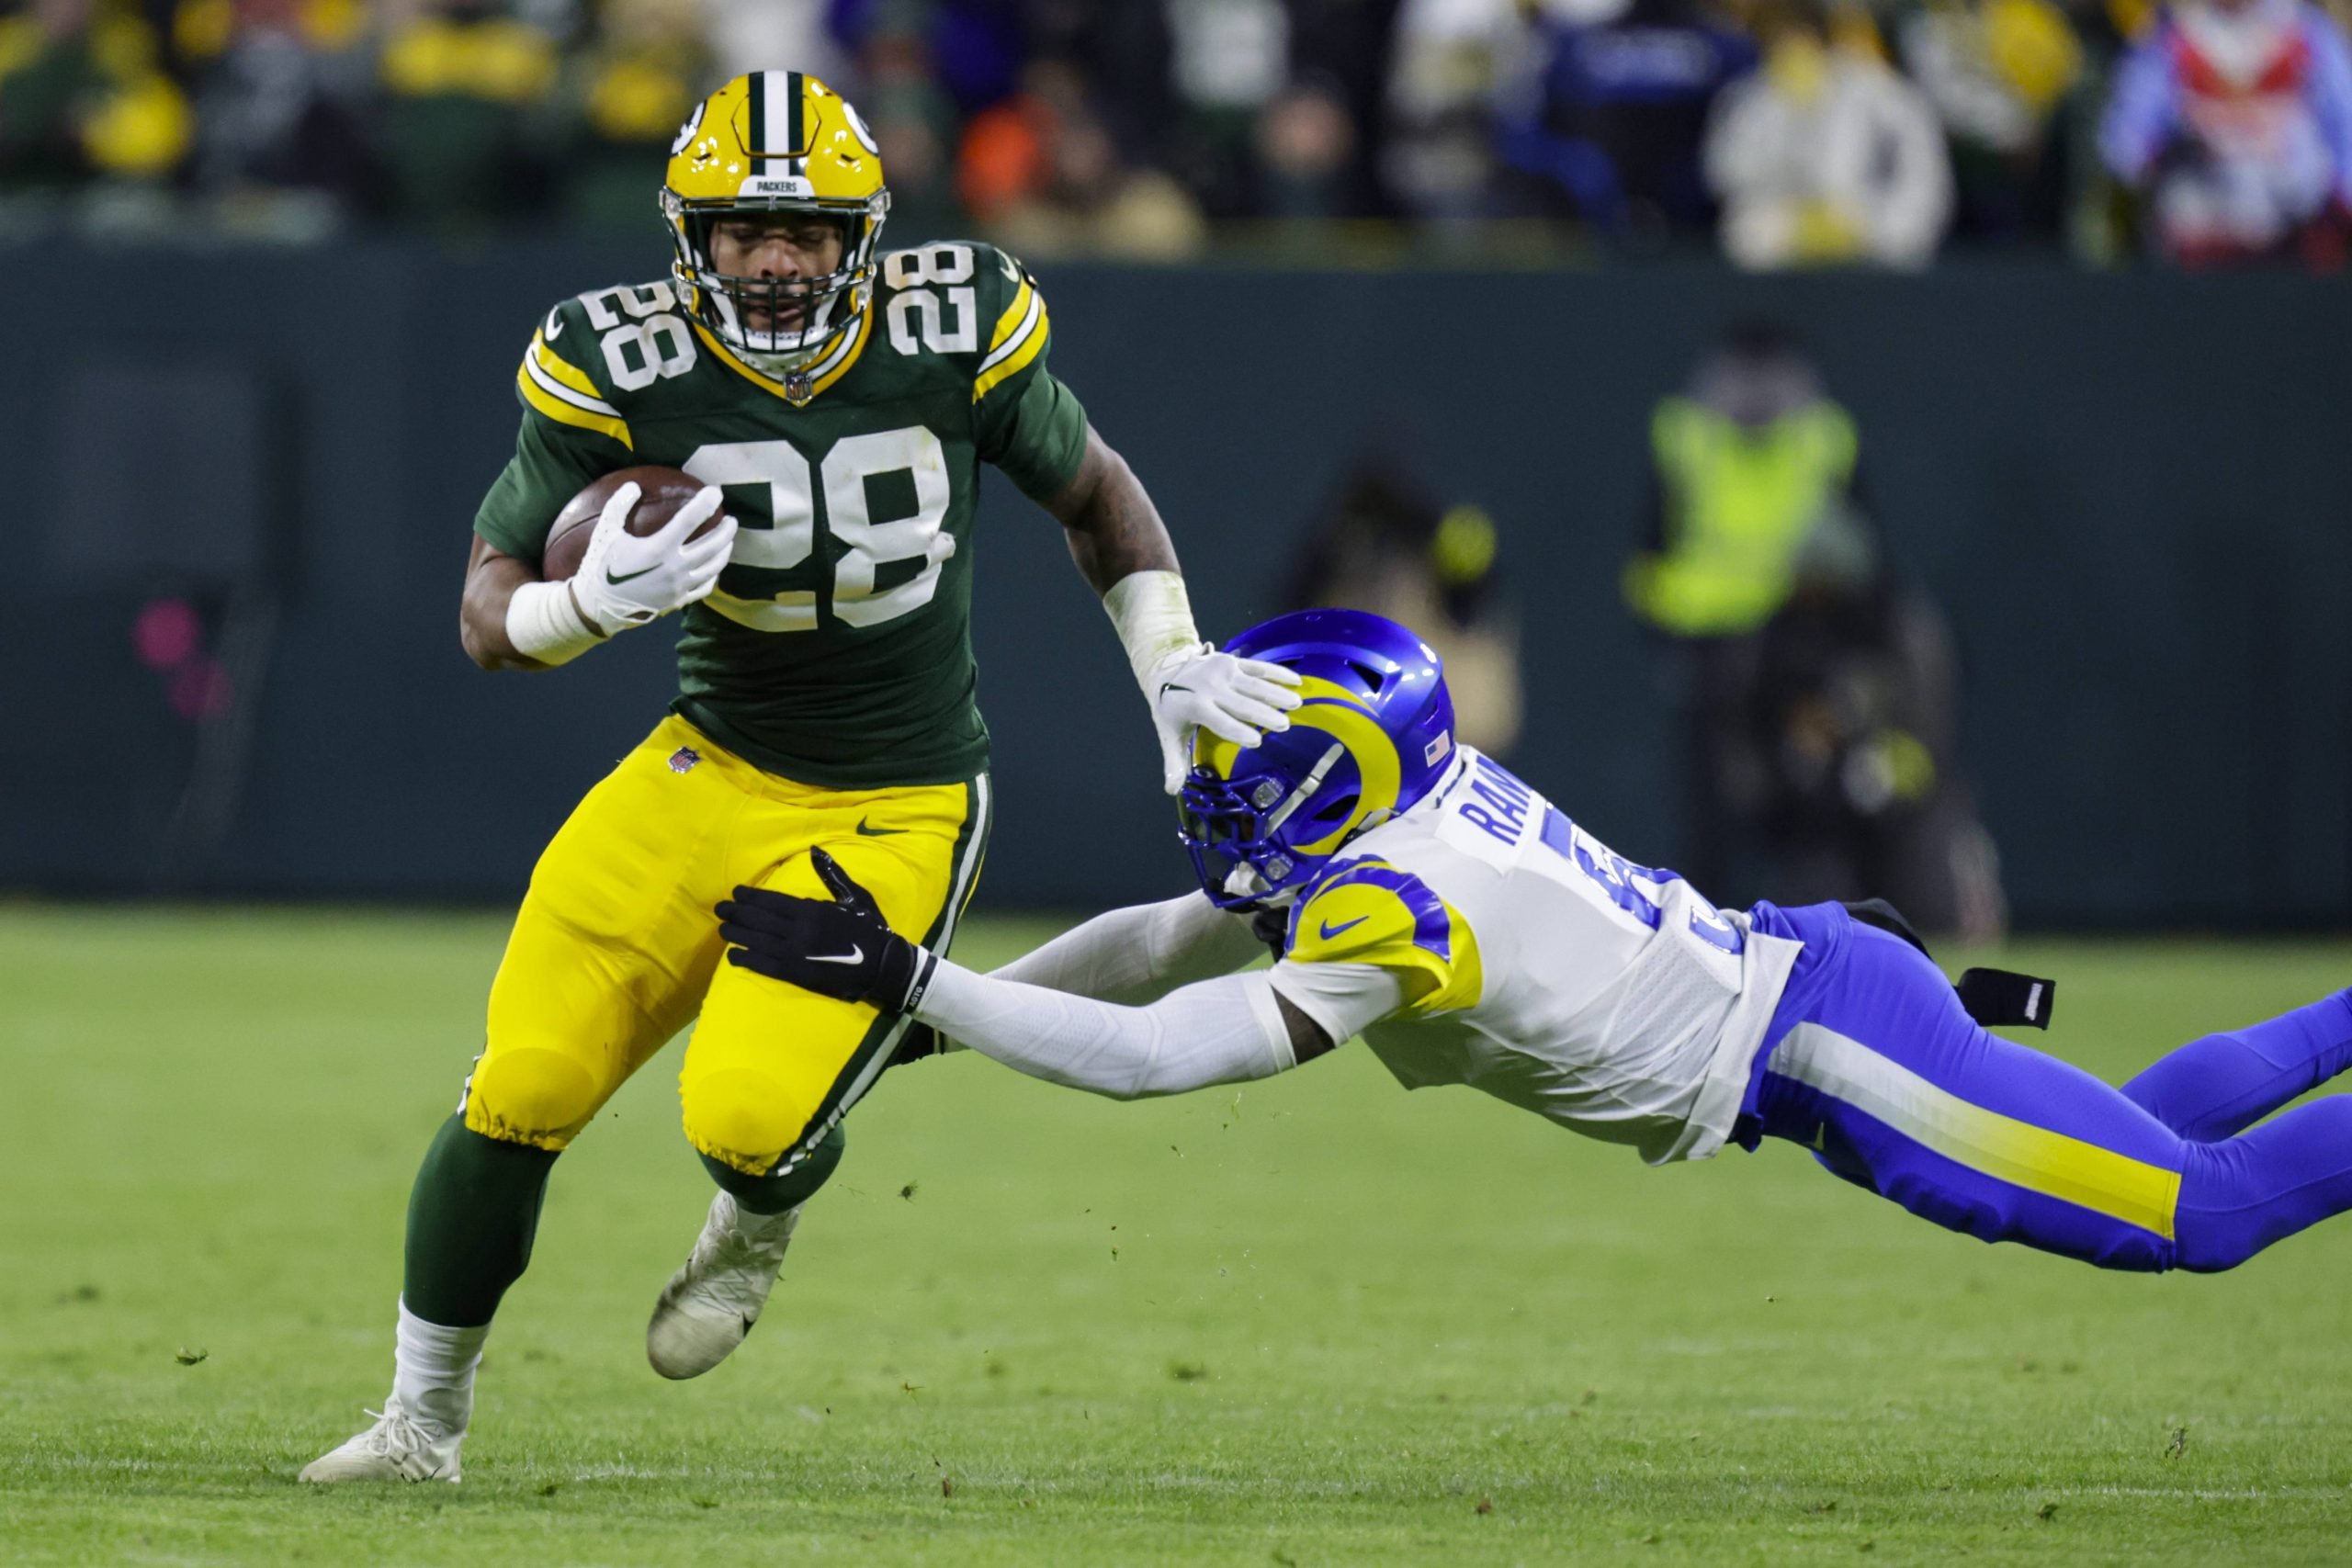 the-la.-rams-miss-out-on-playoff-spot-following-loss-to-the-green-bay-packers